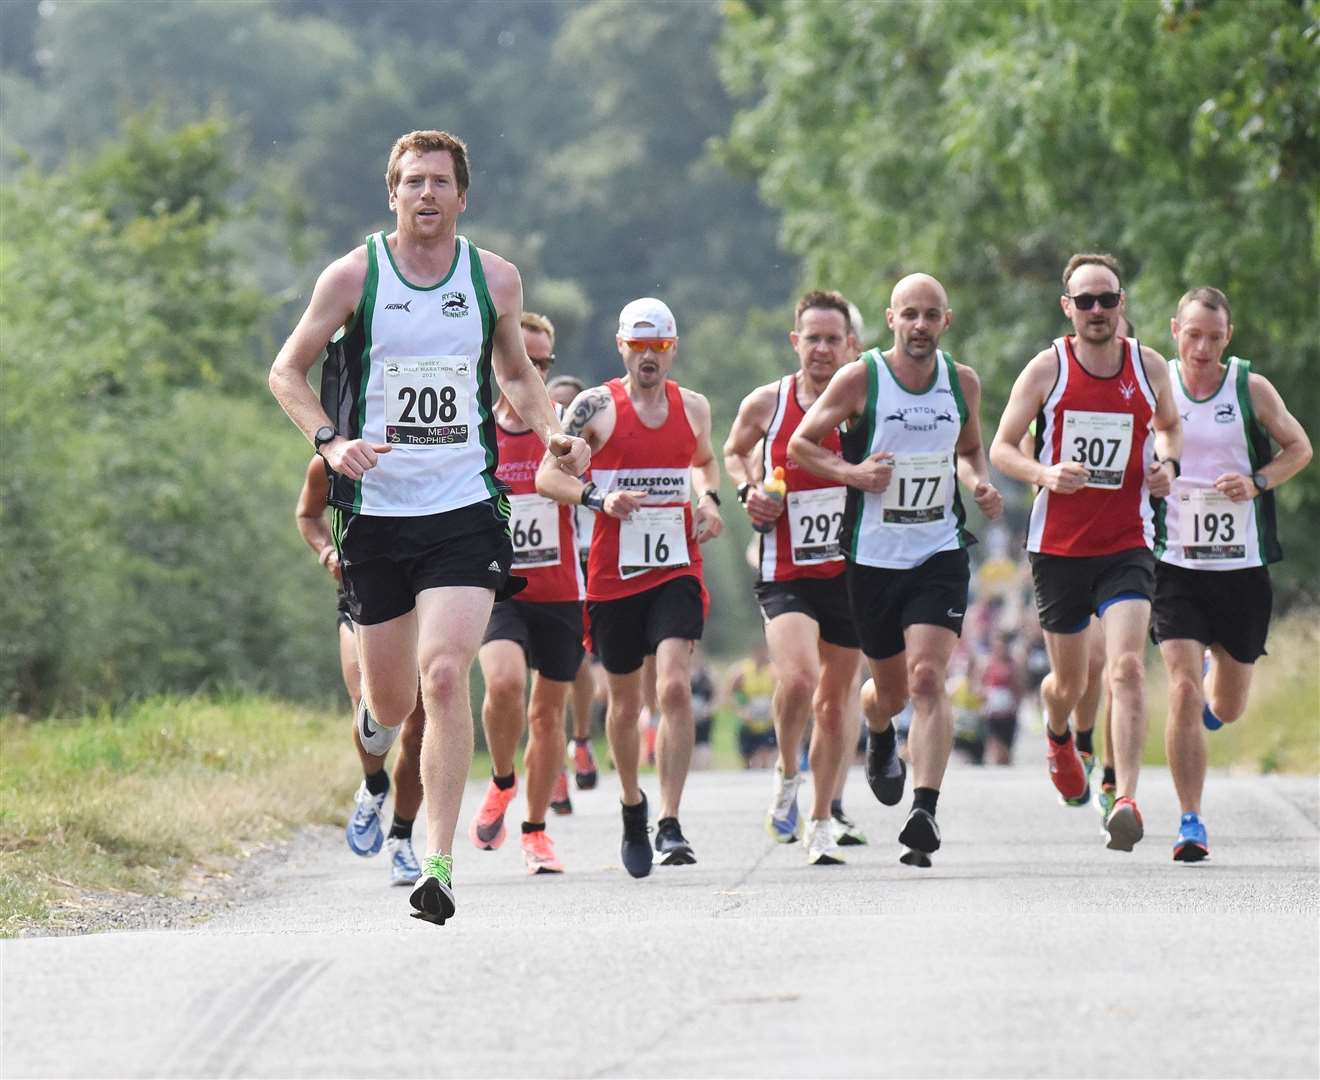 Action from the Wissey Half Marathon which takes place this weekend